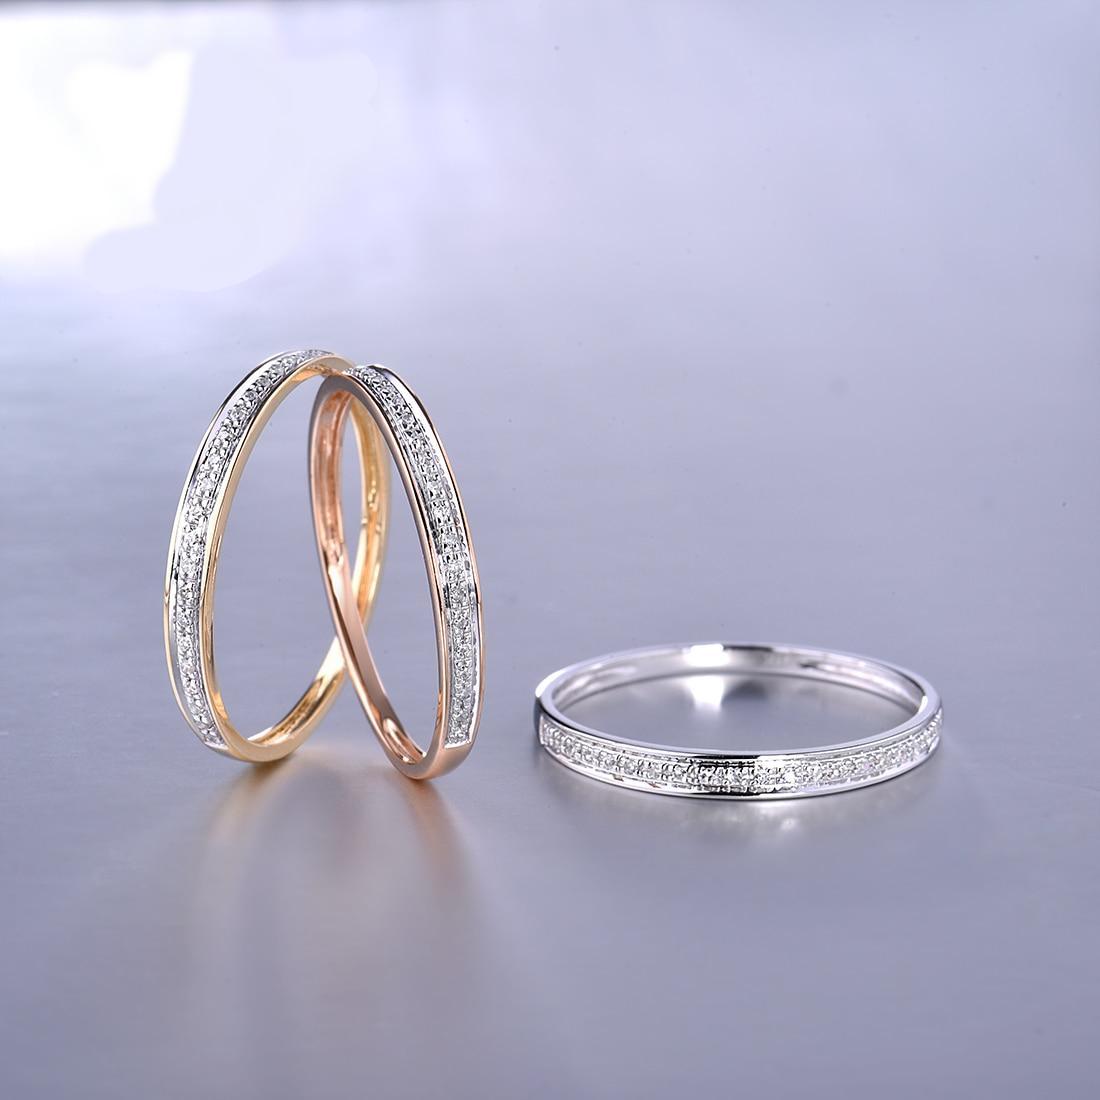 VISTOSO Genuine 14K White/Yellow/Rose Gold Rings For Lady Shiny Diamond Engagement Anniversary Simple Style Eternal Fine Jewelry